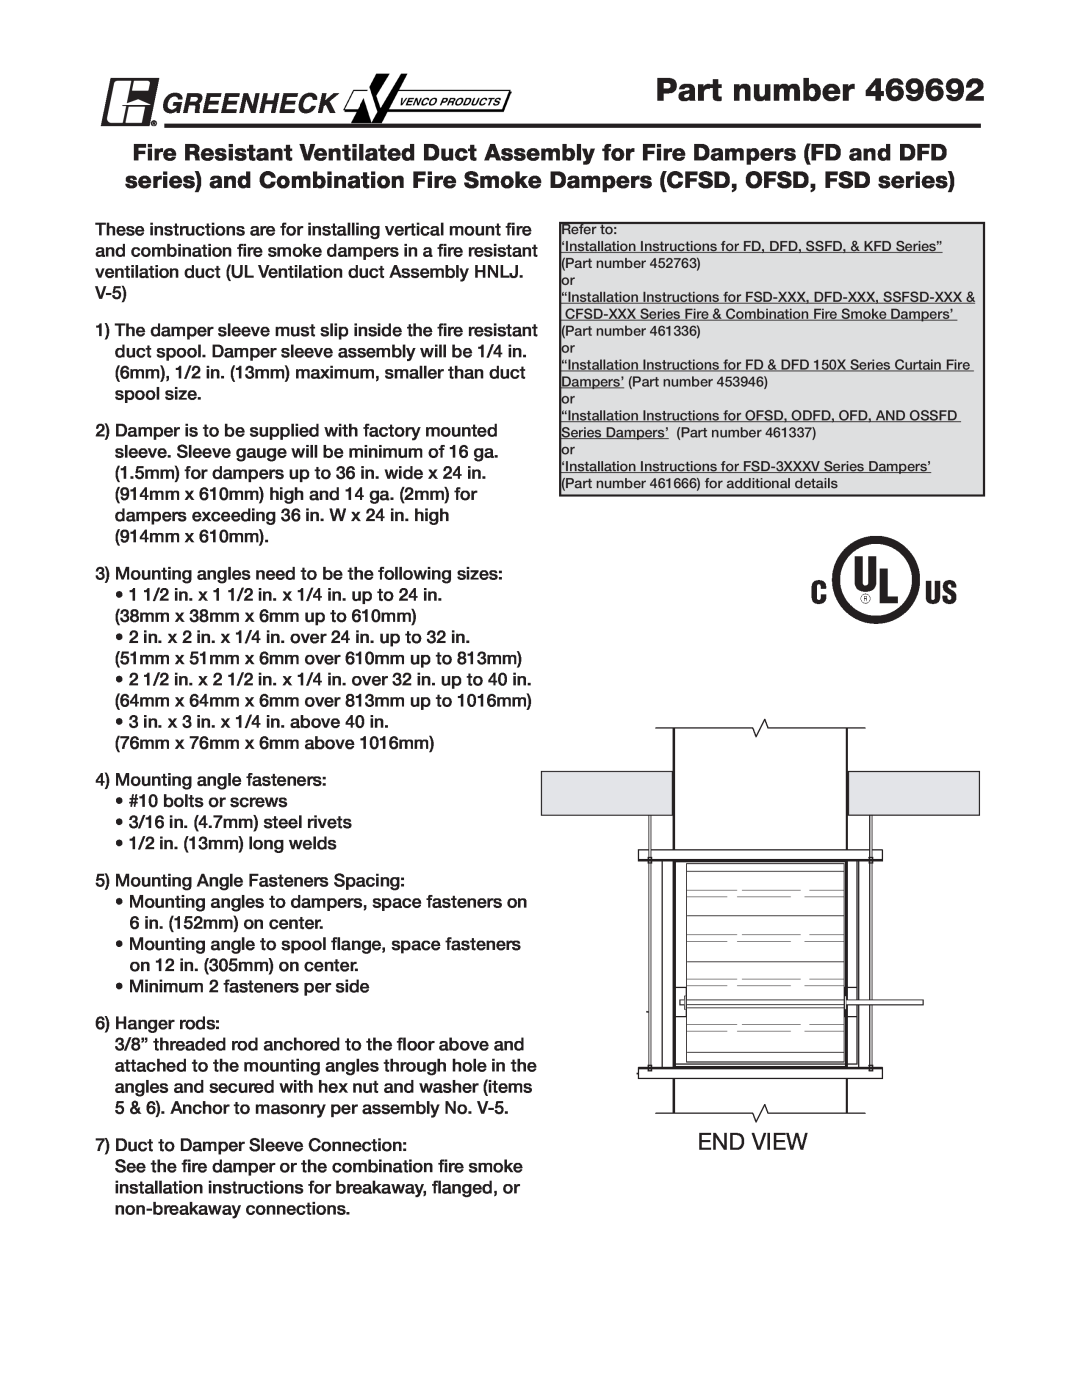 Greenheck Fan CFSD Series installation instructions Part number, End View 